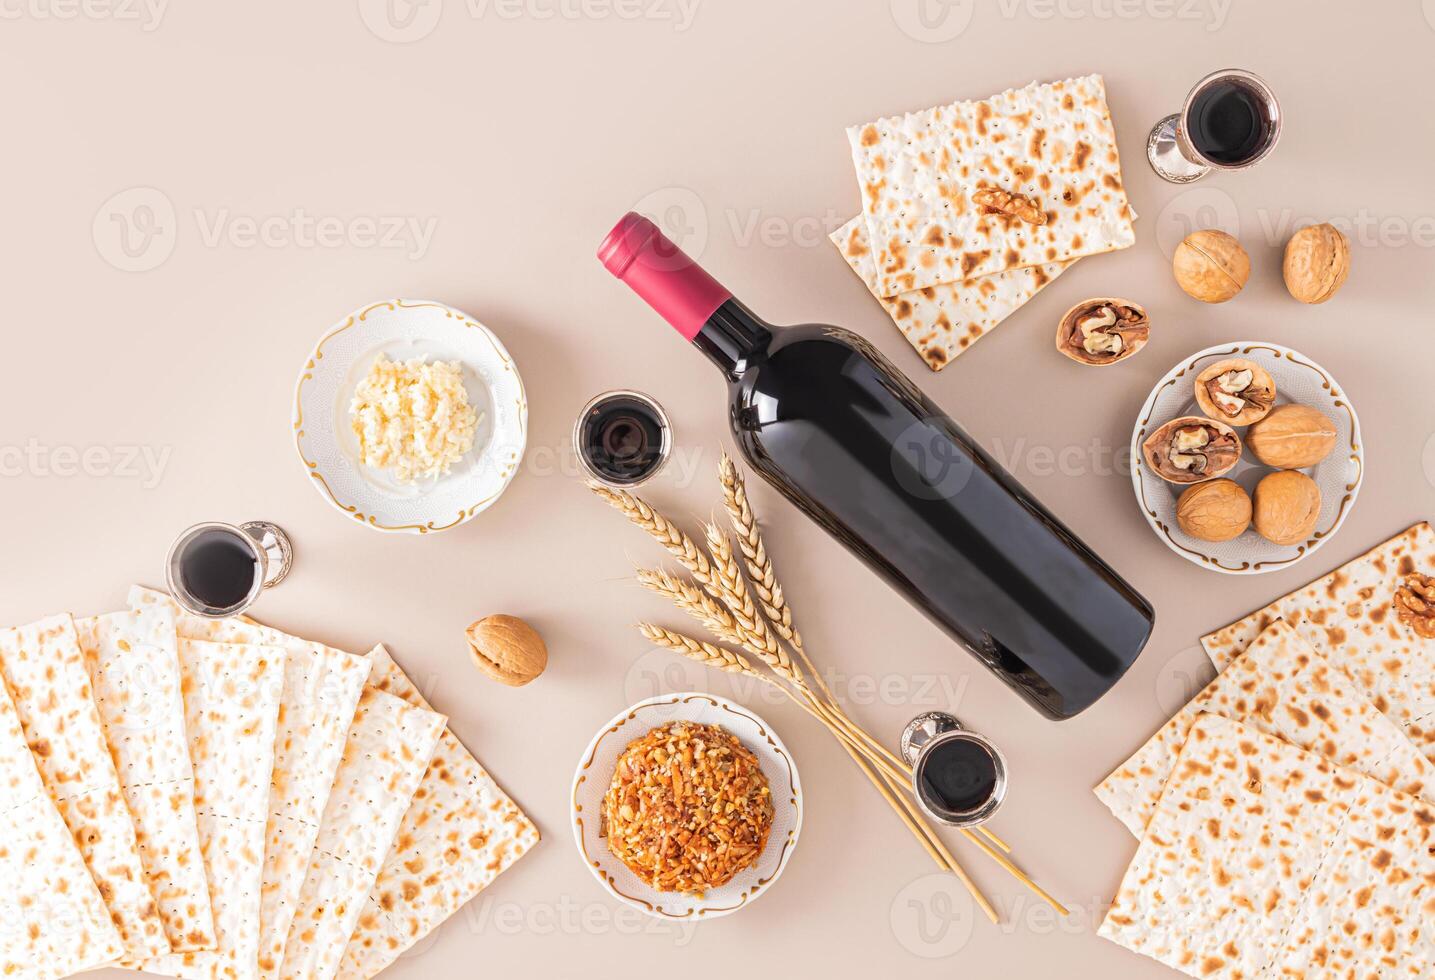 matzoth, bottle of kosher wine, a silver cup with wine, walnuts, fruit mix, spikes. Traditional food for the celebration of the Jewish Passover. photo